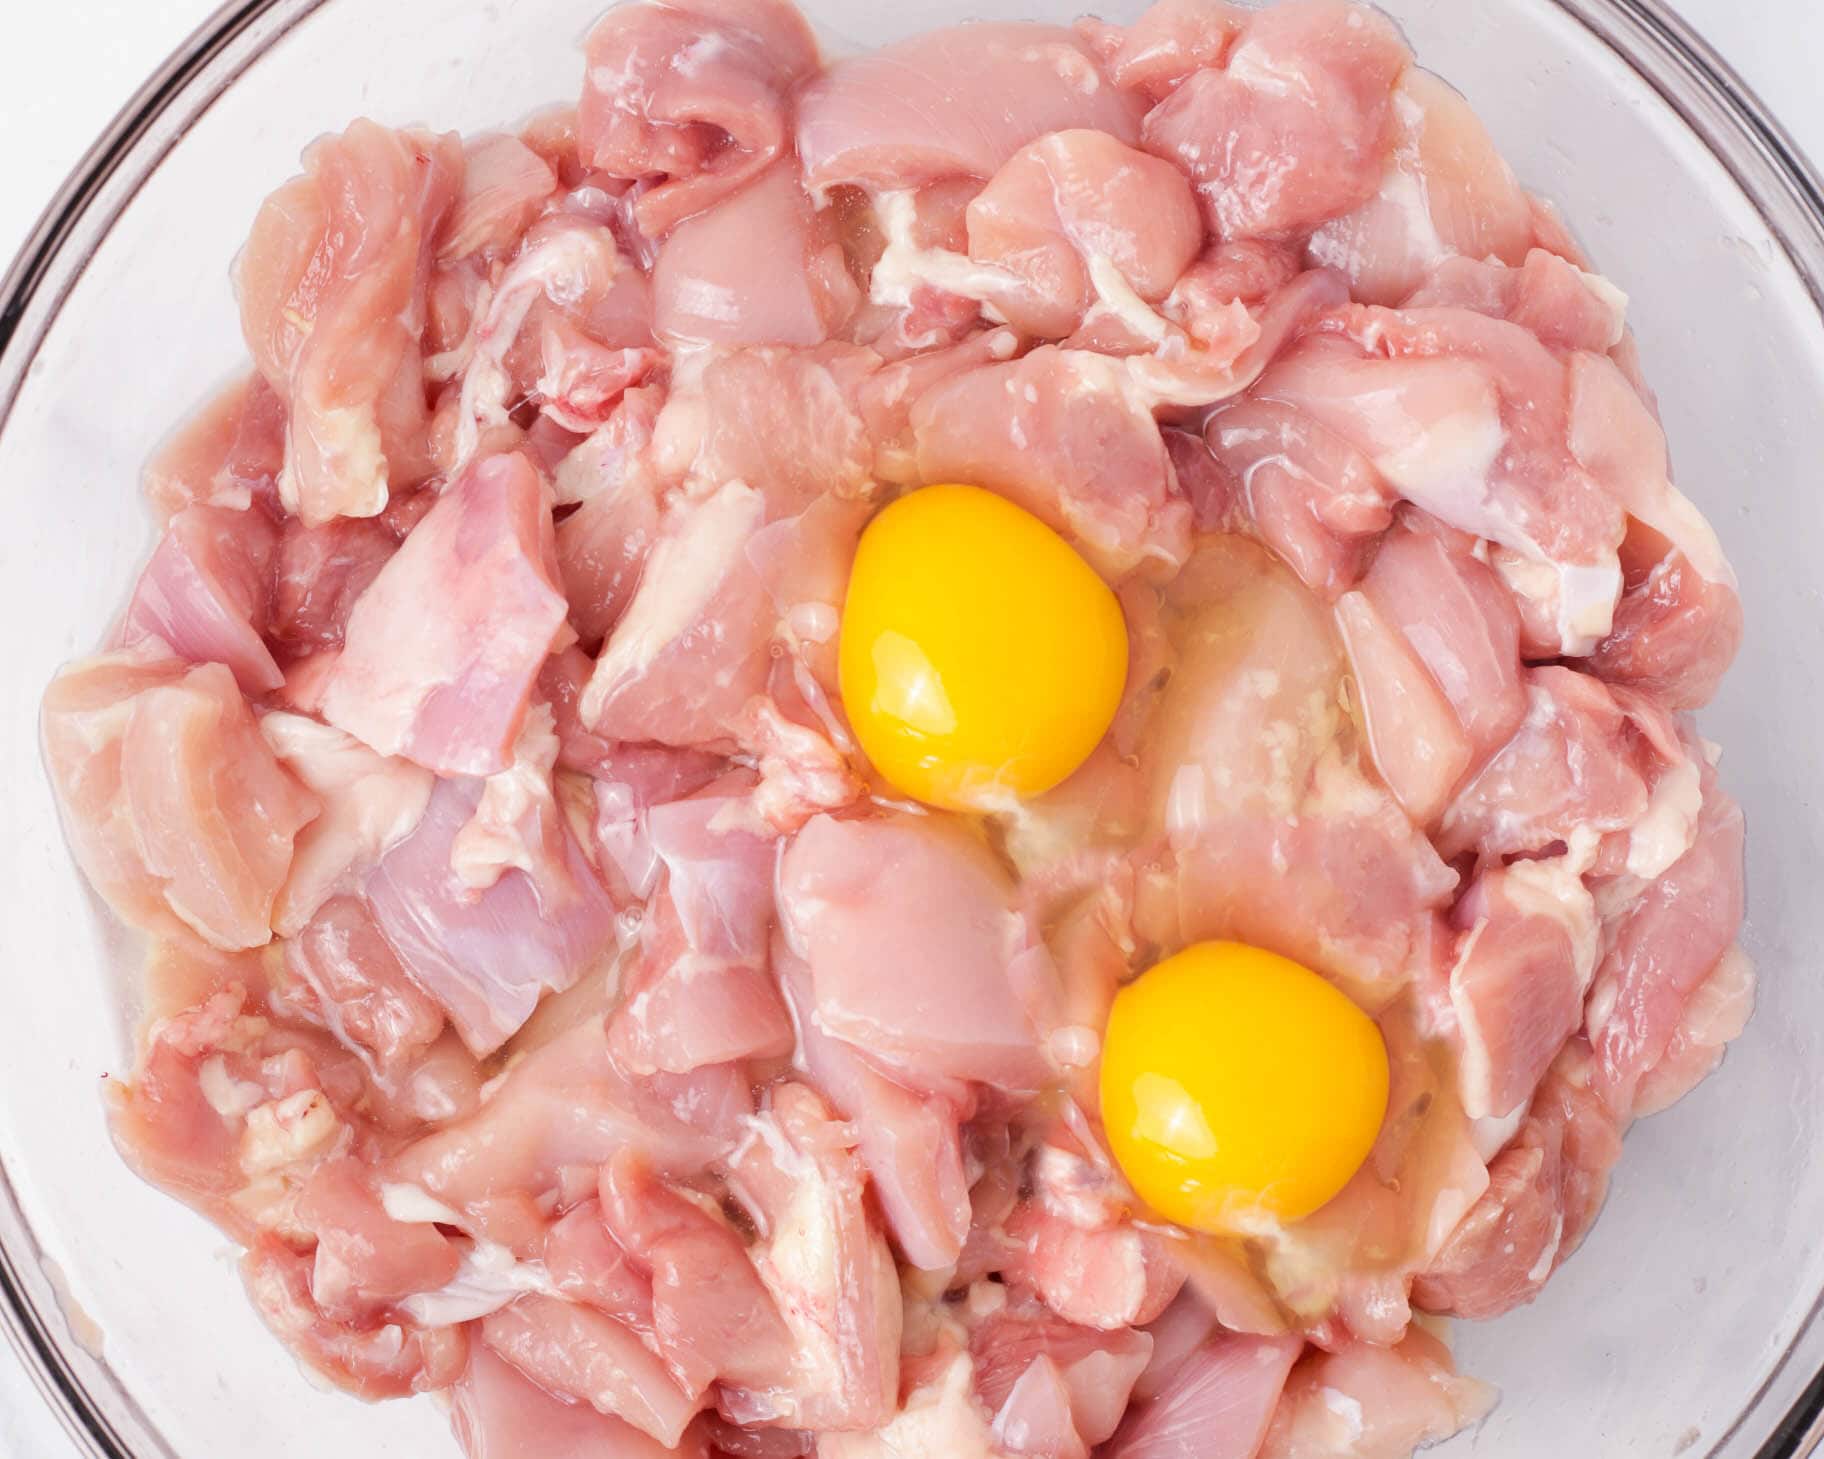 Eggs added to diced chicken thighs in a bowl.